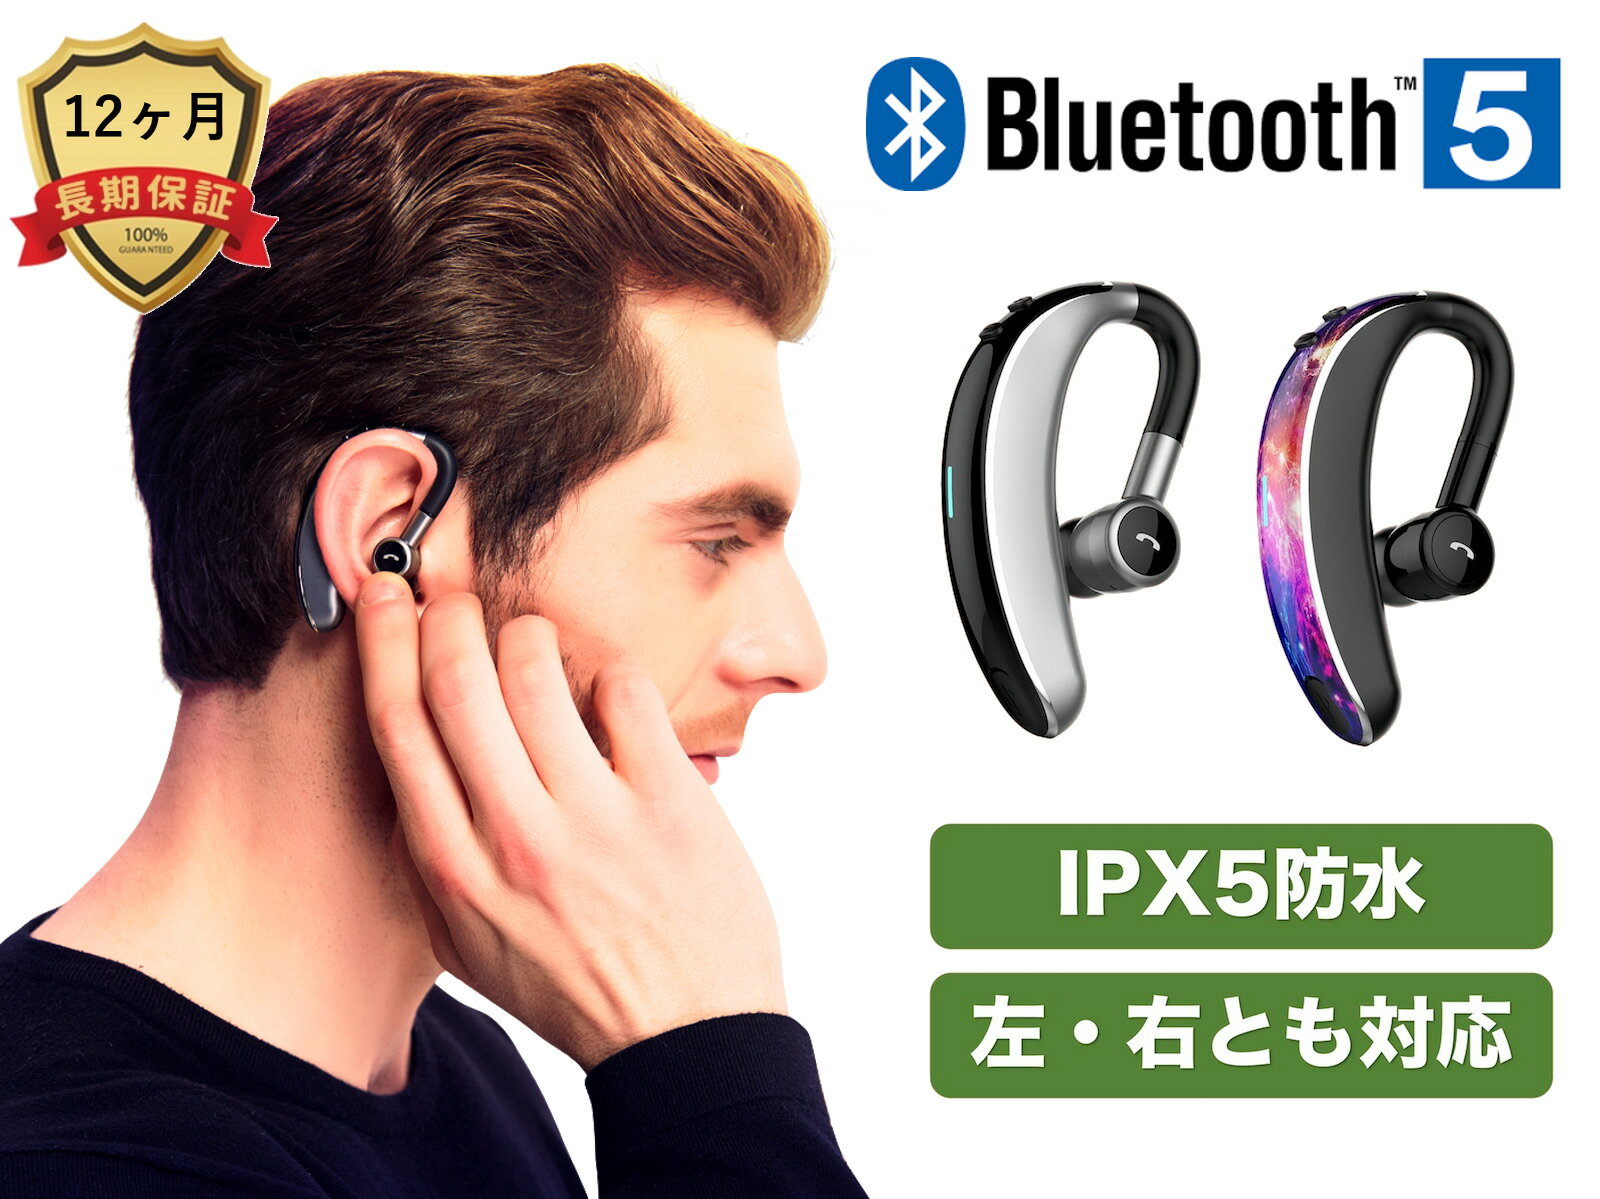 Bluetooth 5.0IPX5ɿ 磻쥹ۥ Ȥб Ϣ³20ֻ ܸ  إåɥۥ Ҽ Ķ Ķ ⲻ ޥ¢ ֥롼ȥ إåɥå iPhone Android ޥ б ̵ COOPO CP-V7